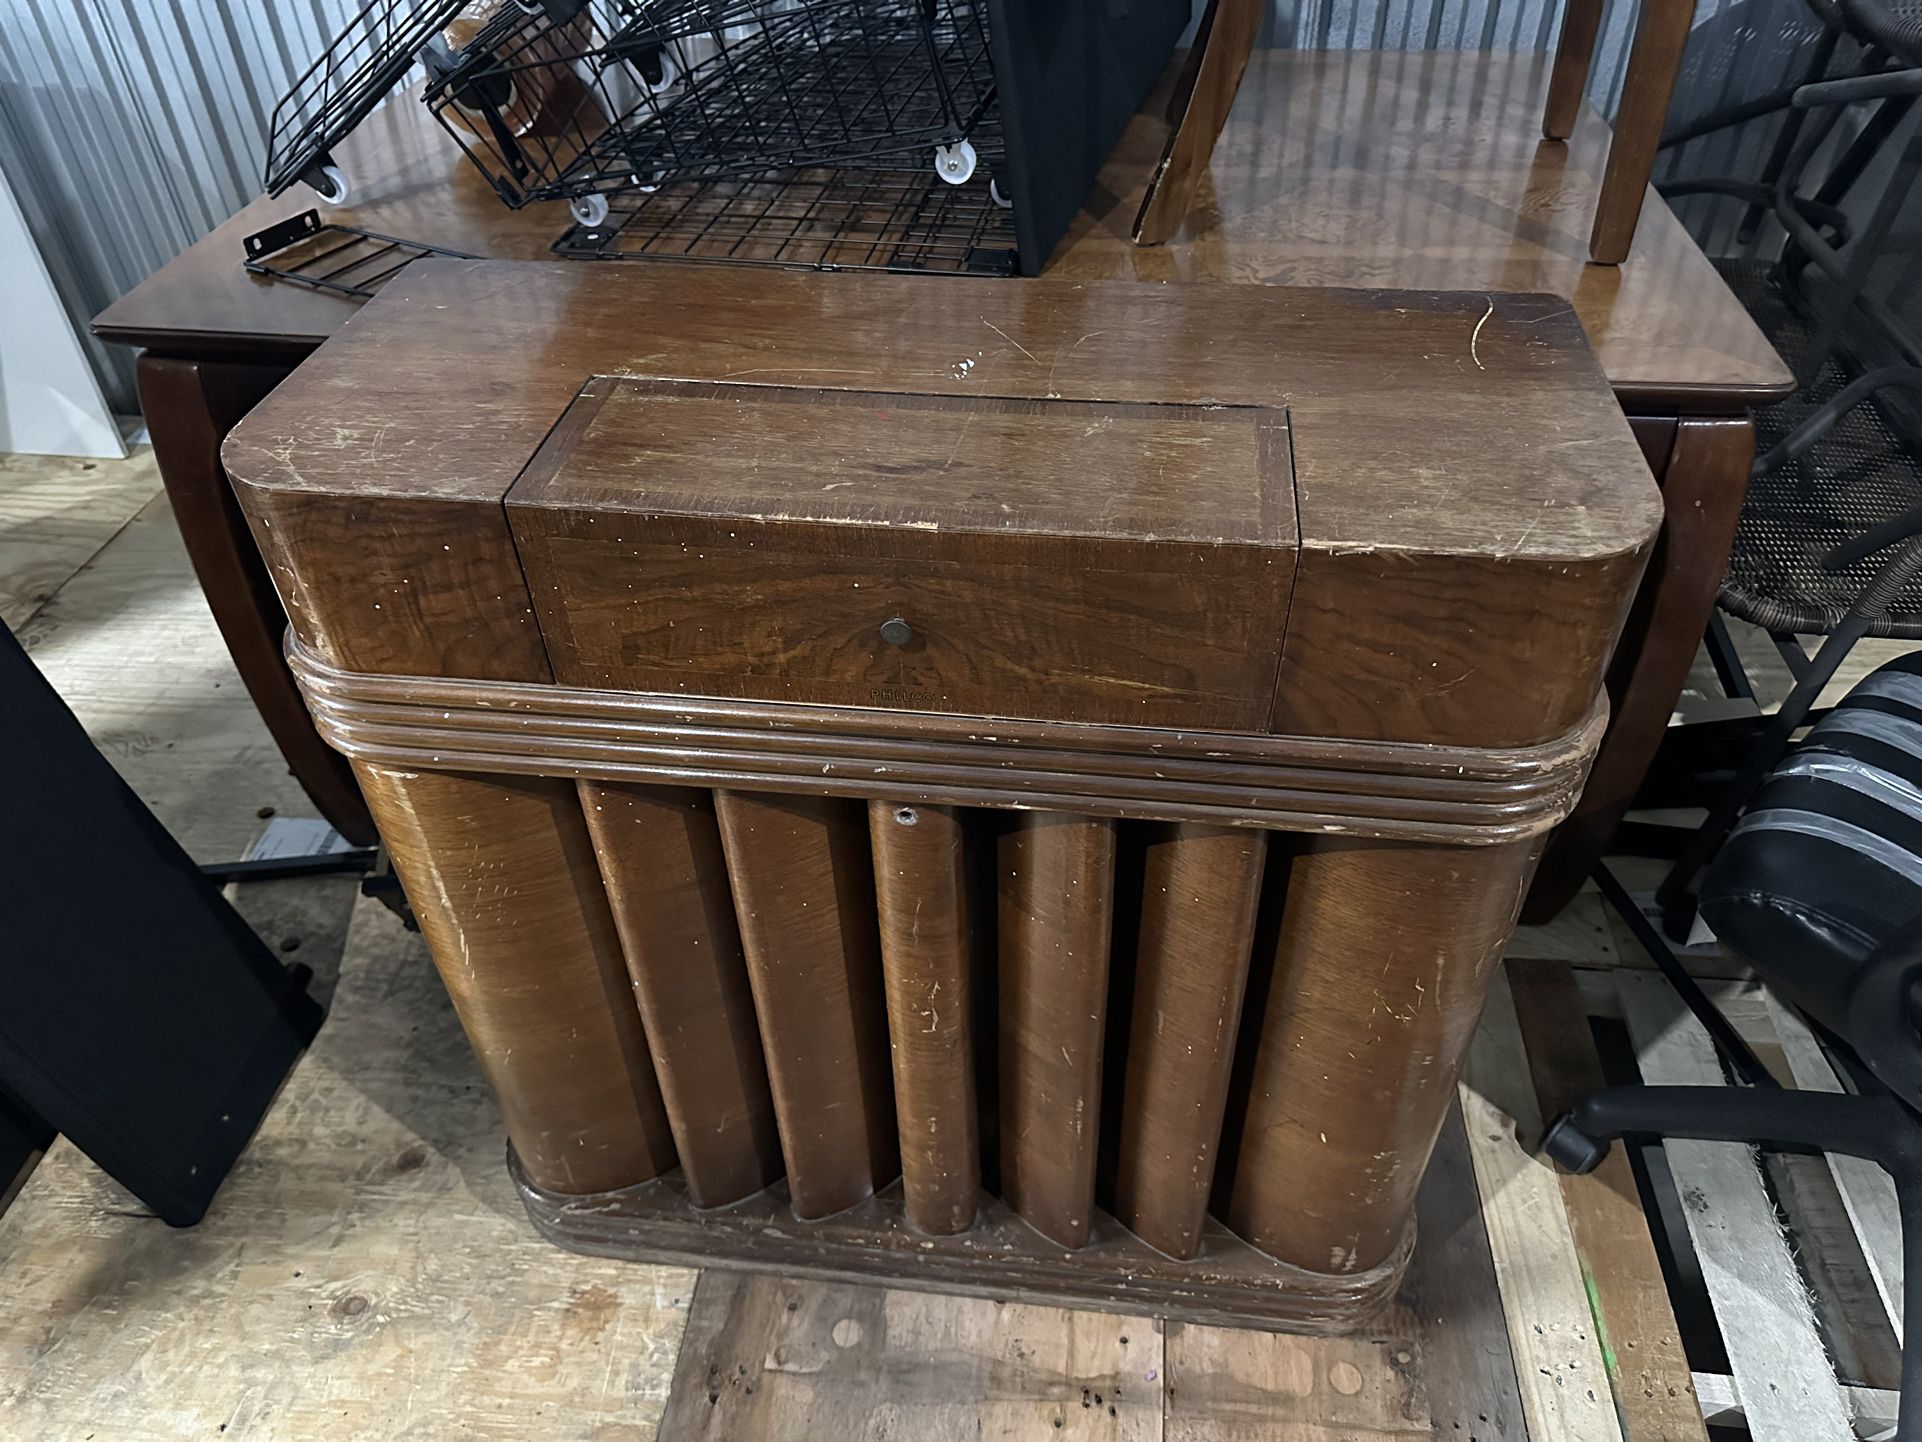 PHILCO 1941 COOL ART DECO 12 TUBE RADIO CONSOLE 41-300 NEED WORK  Measures 34.5" wide, 36" tall, 14" deep. The power cord is very old, dried broken, a